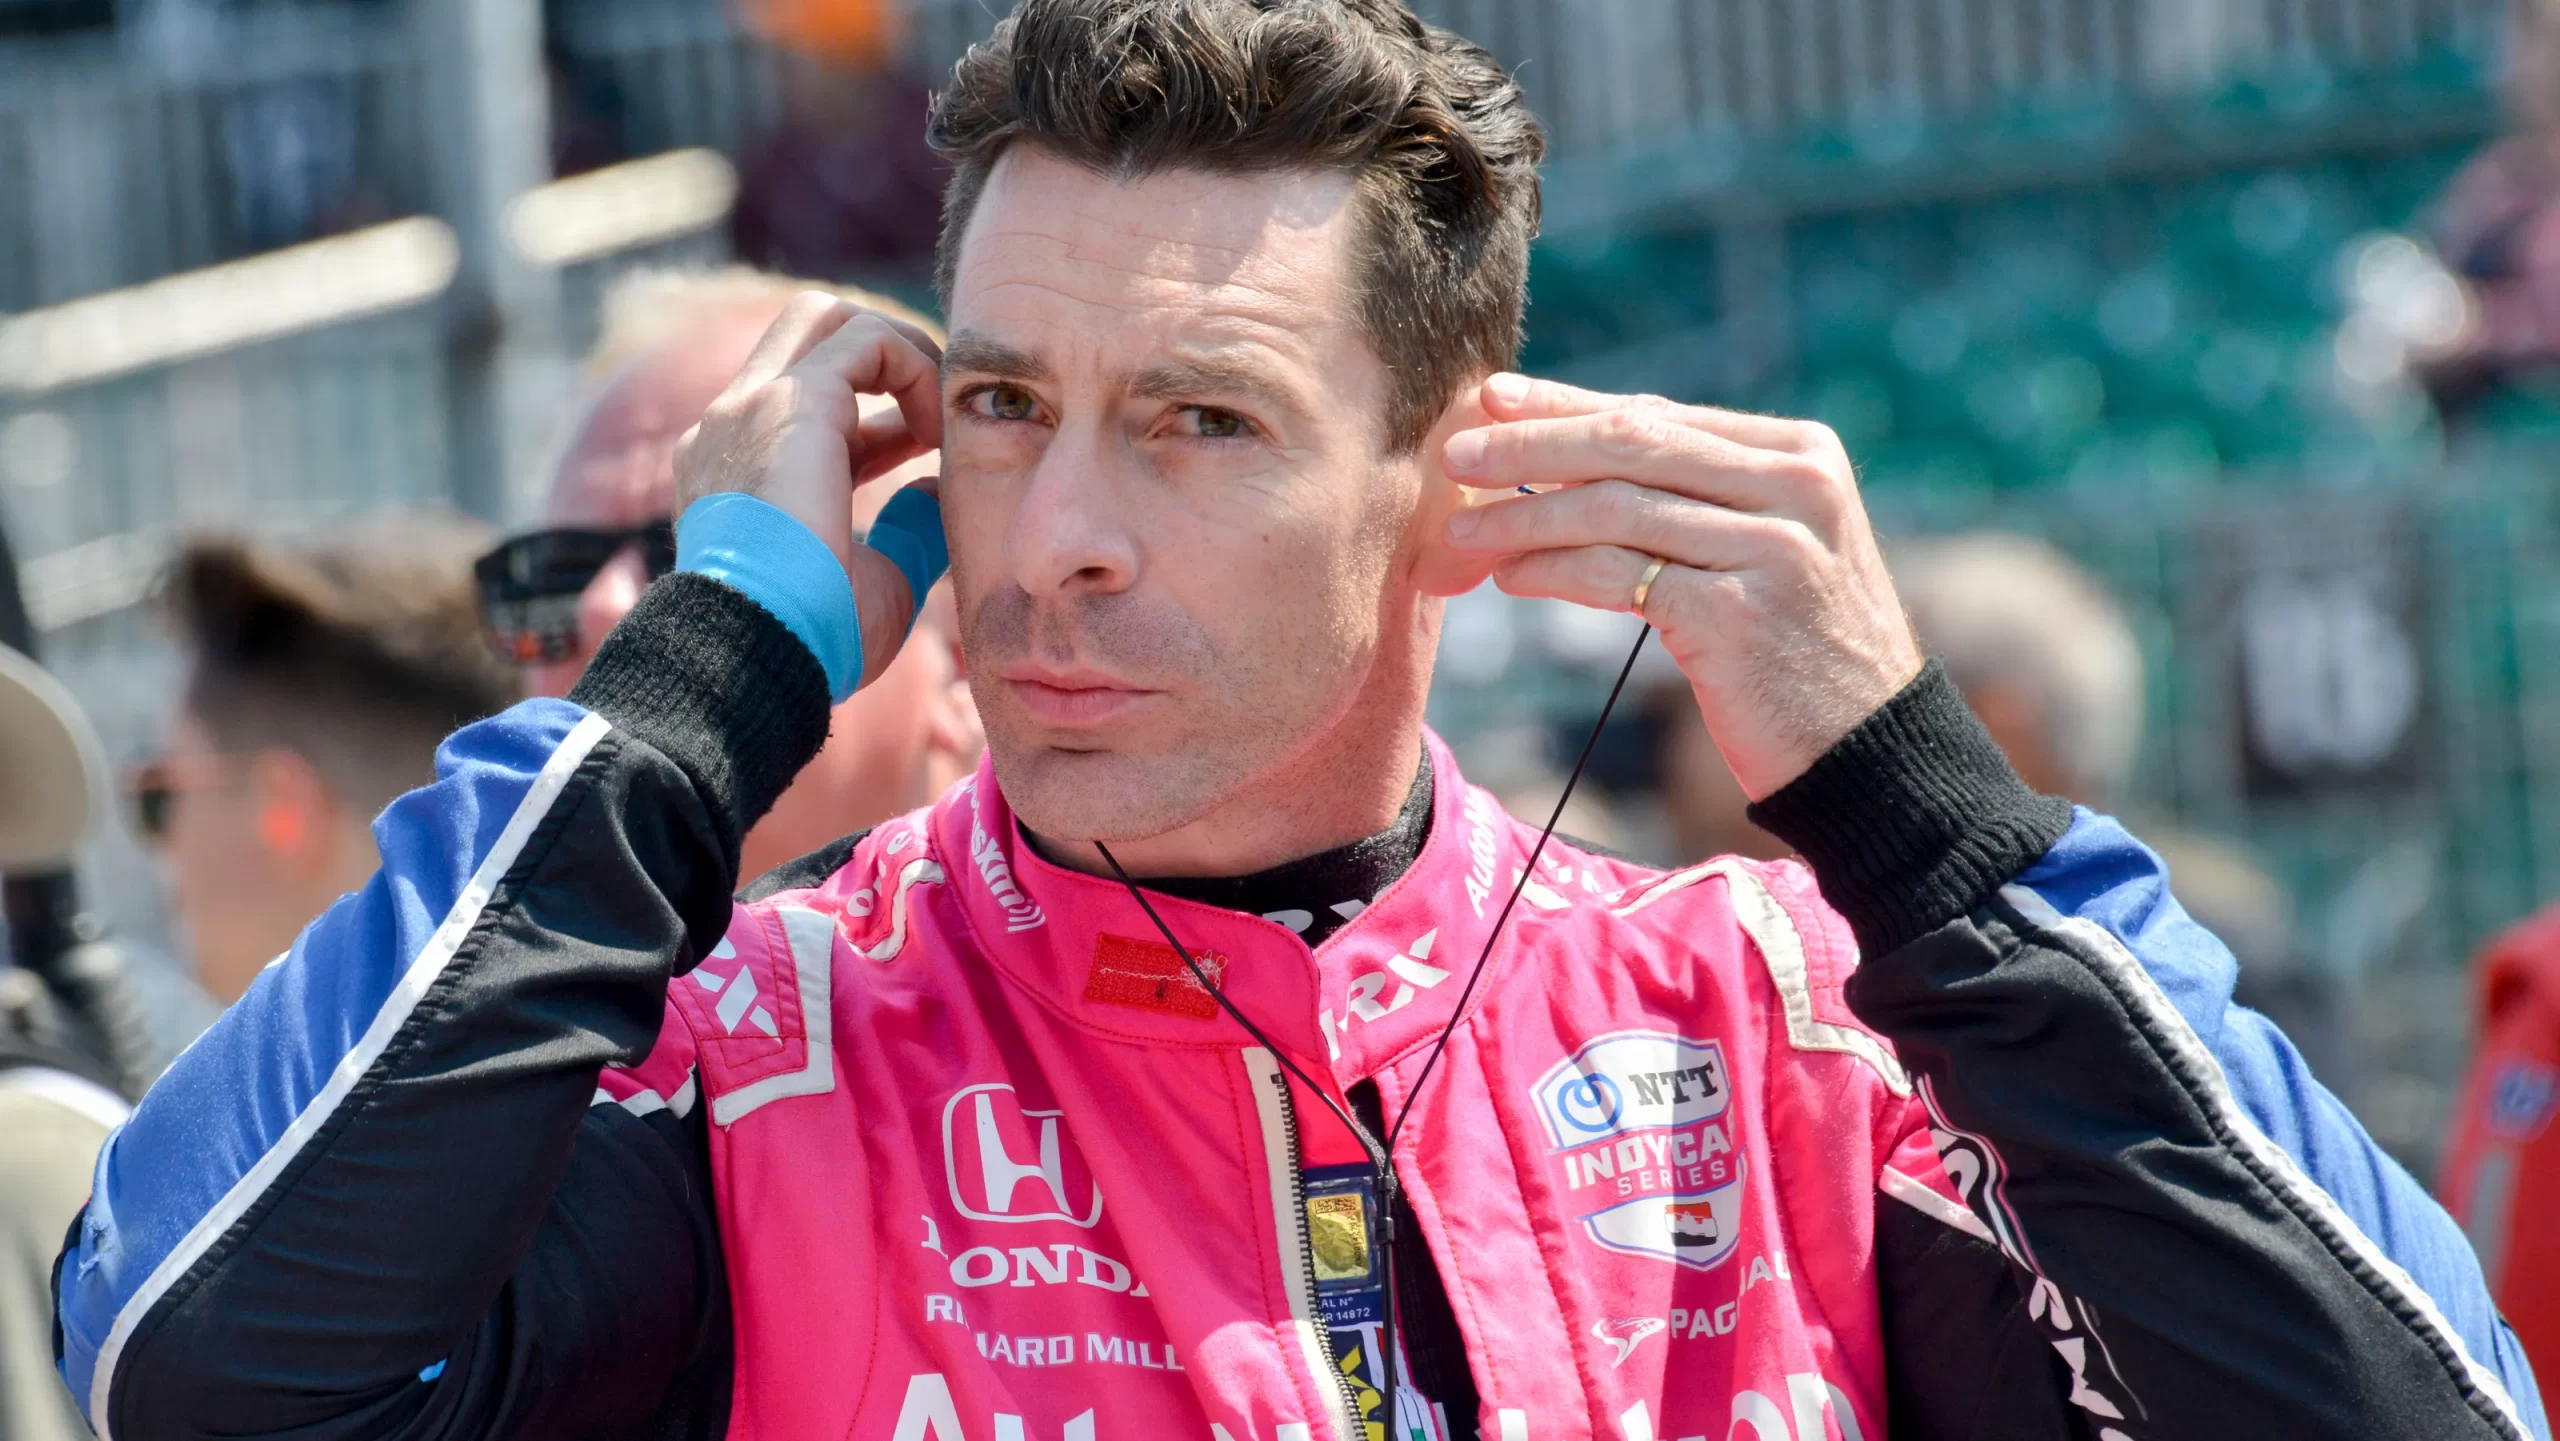 Pagenaud Updates on Health and Talks About Potential Racing Comeback in 2024